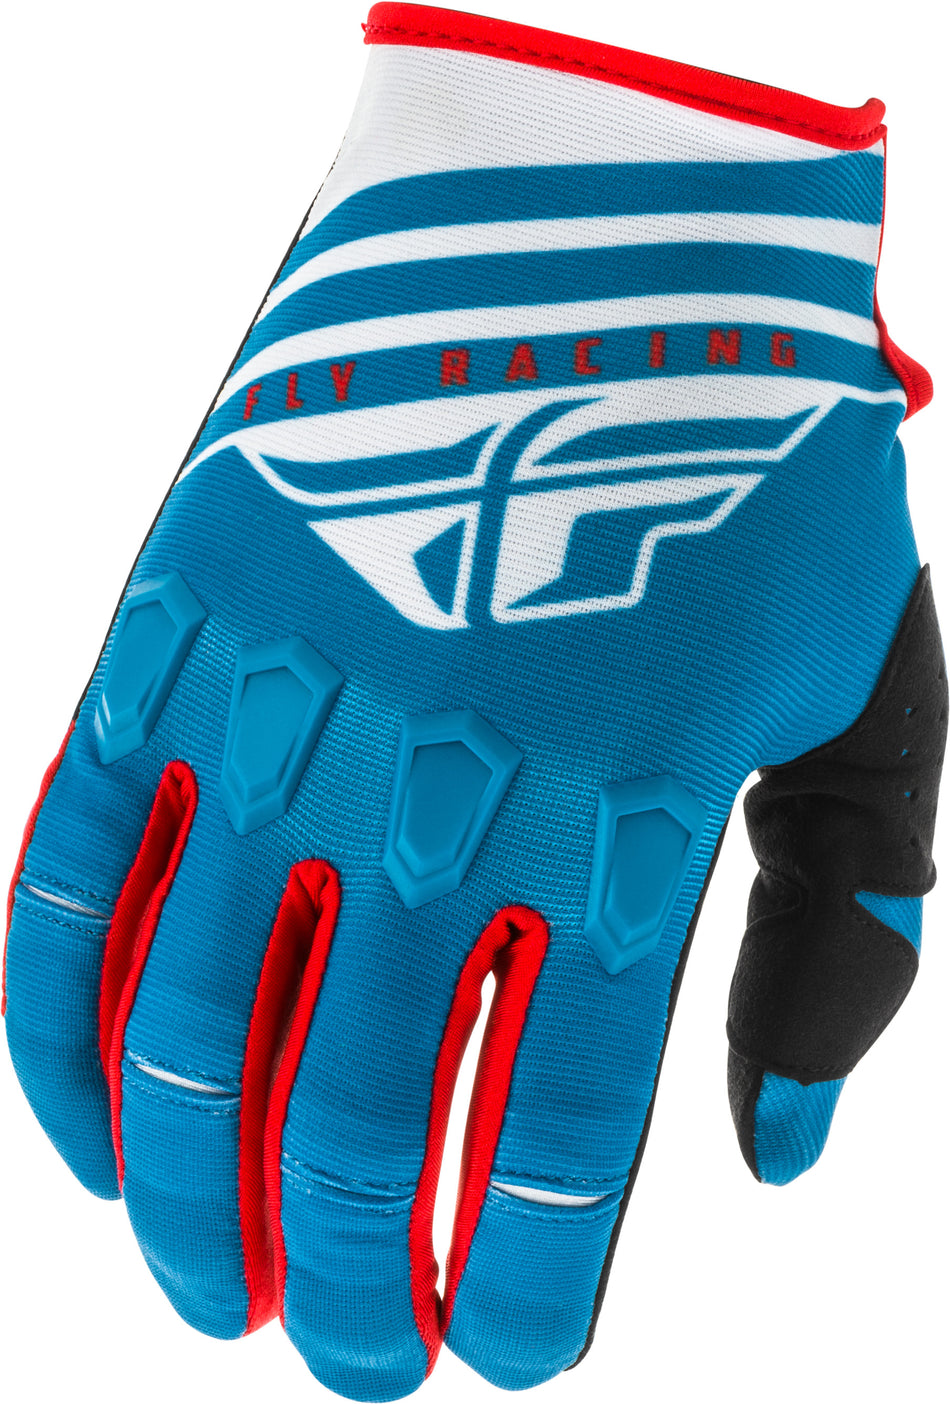 FLY RACING Kinetic K220 Gloves Blue/White/Red Sz 07 373-51107